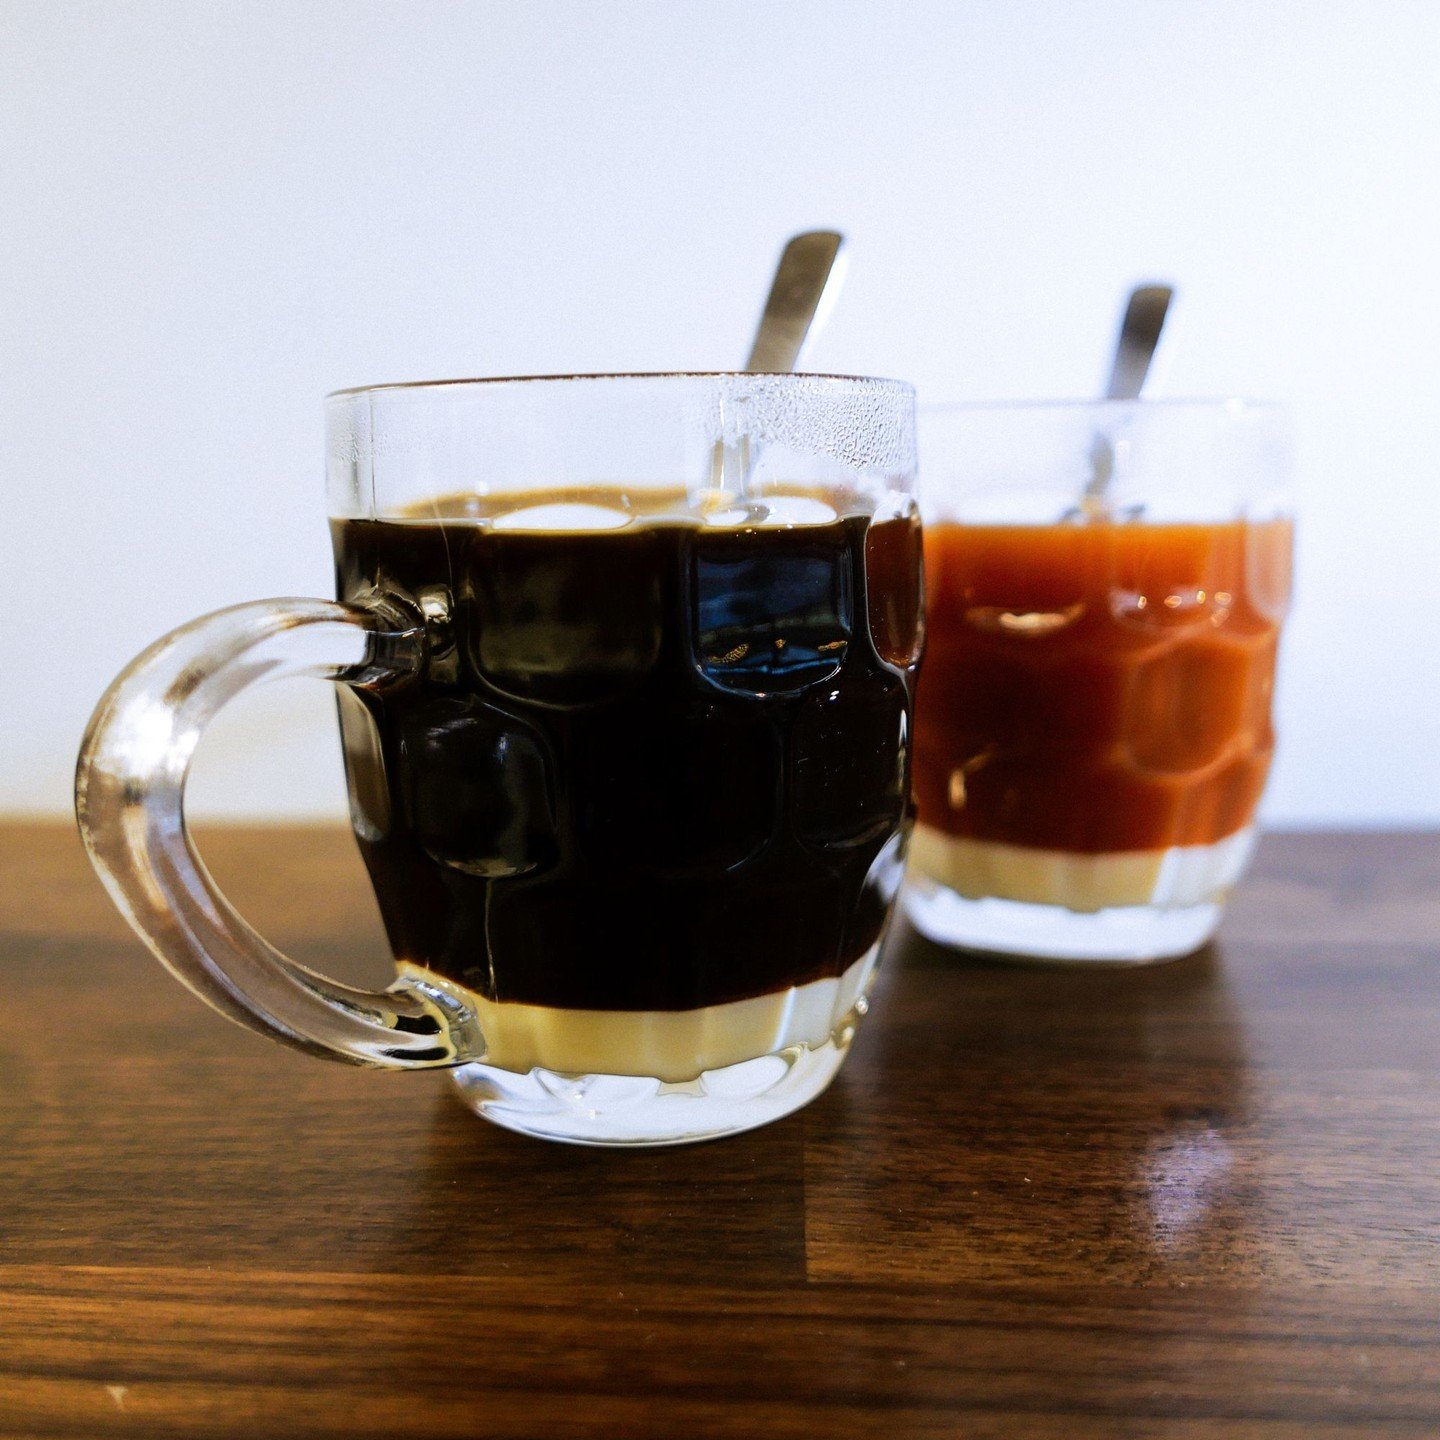 Ramp up the week with some of our Kopi and Teh! Unlike Canadian coffee and tea, Singaporean Kopi is made with butter-roasted Robusta coffee beans, and Singaporean Teh is made with black tea dust. Order it standard with condensed milk, Kopi-C or Teh-C